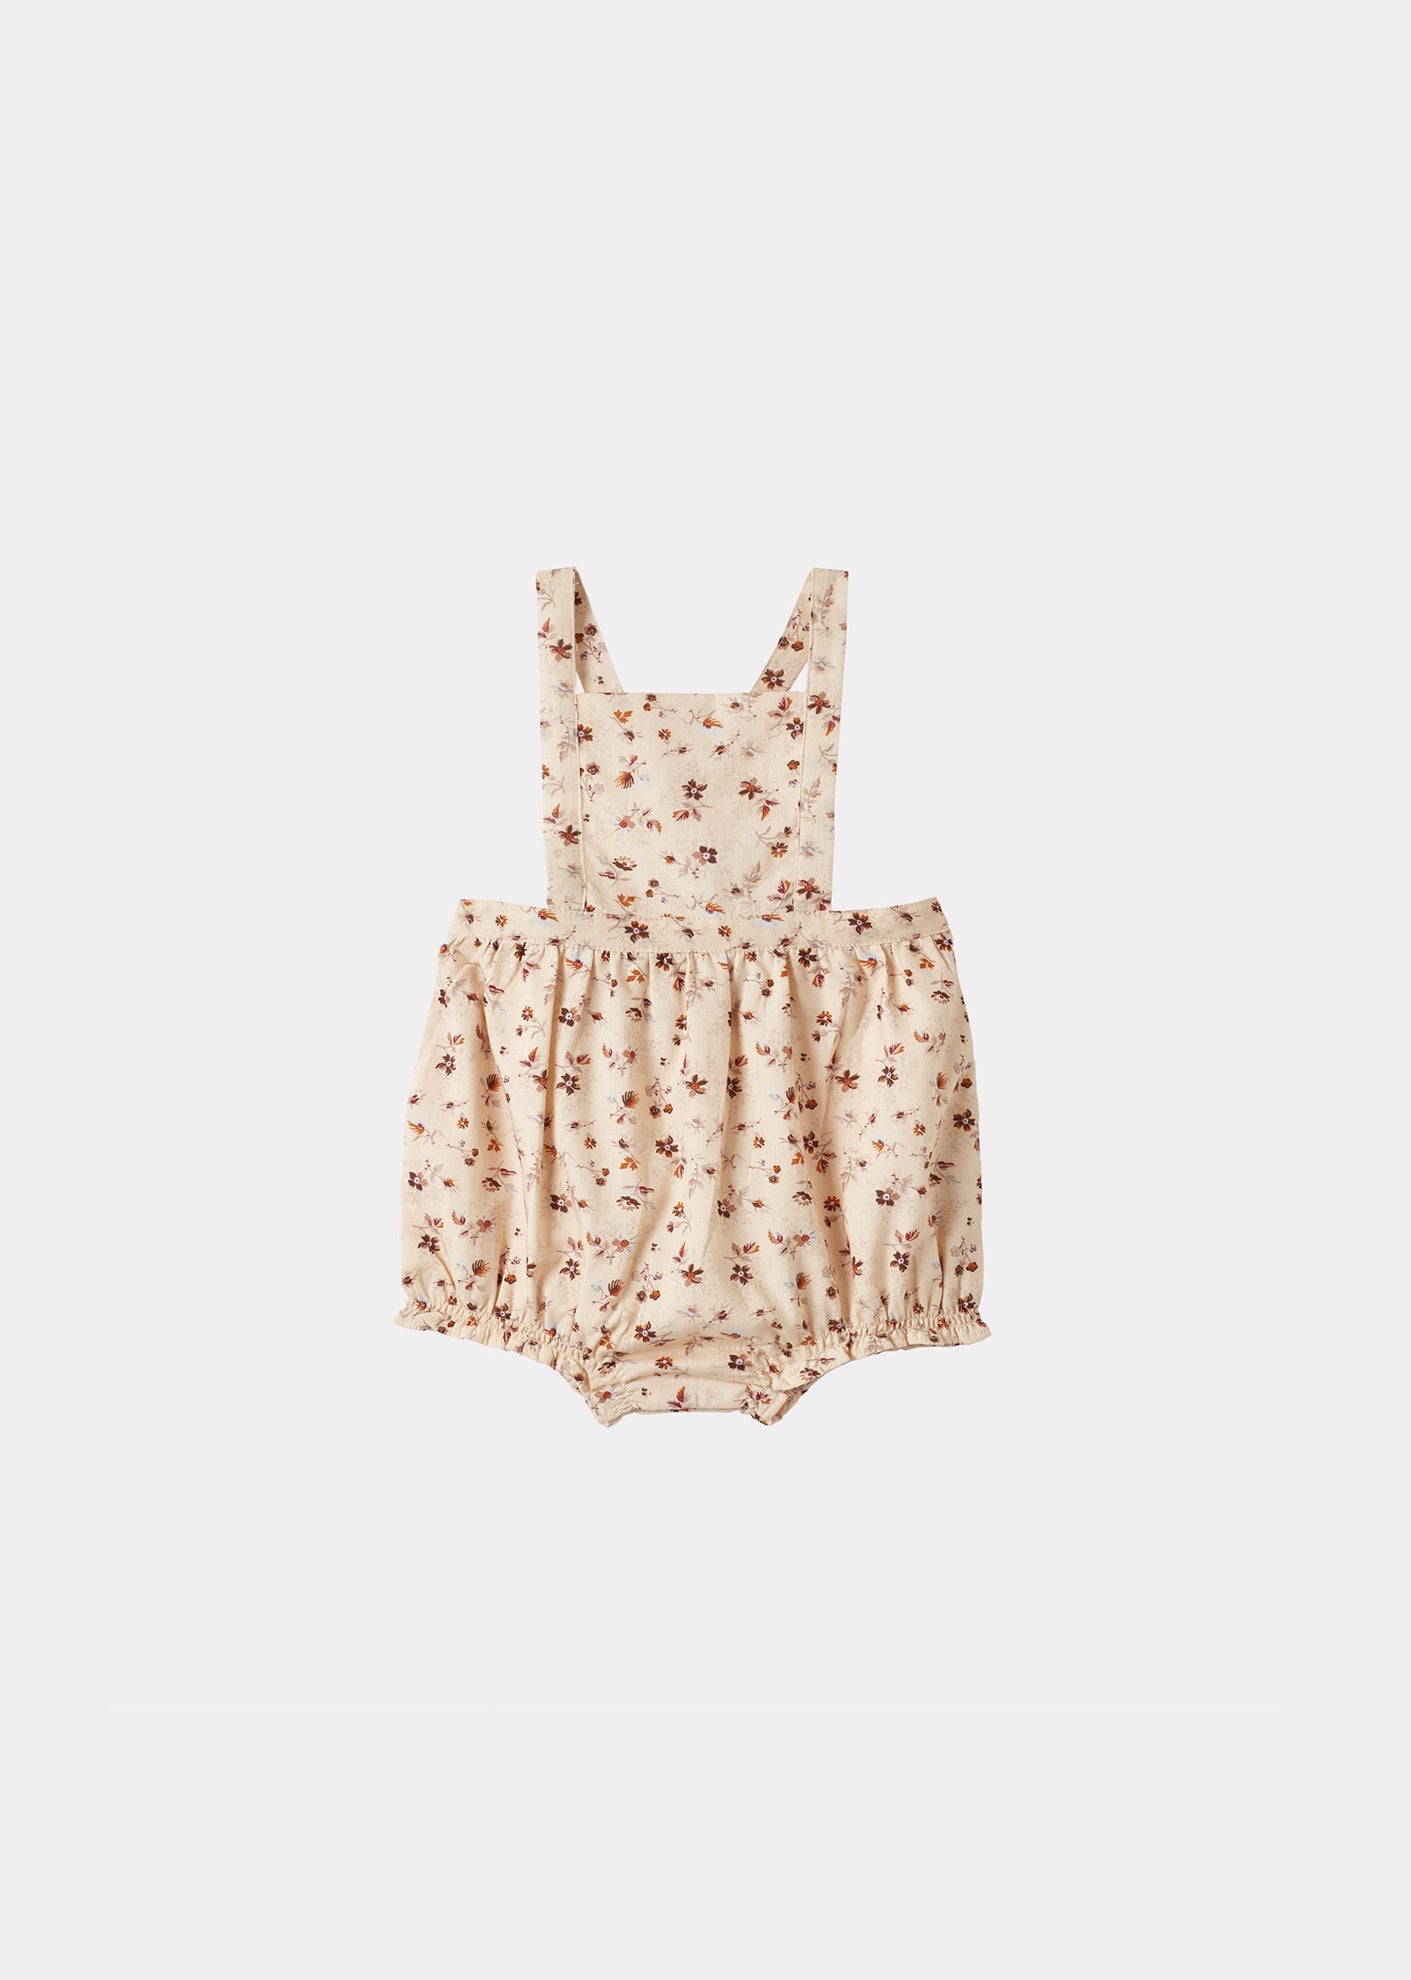 CLAM BABY ROMPER - DITSY FLORAL PRINT